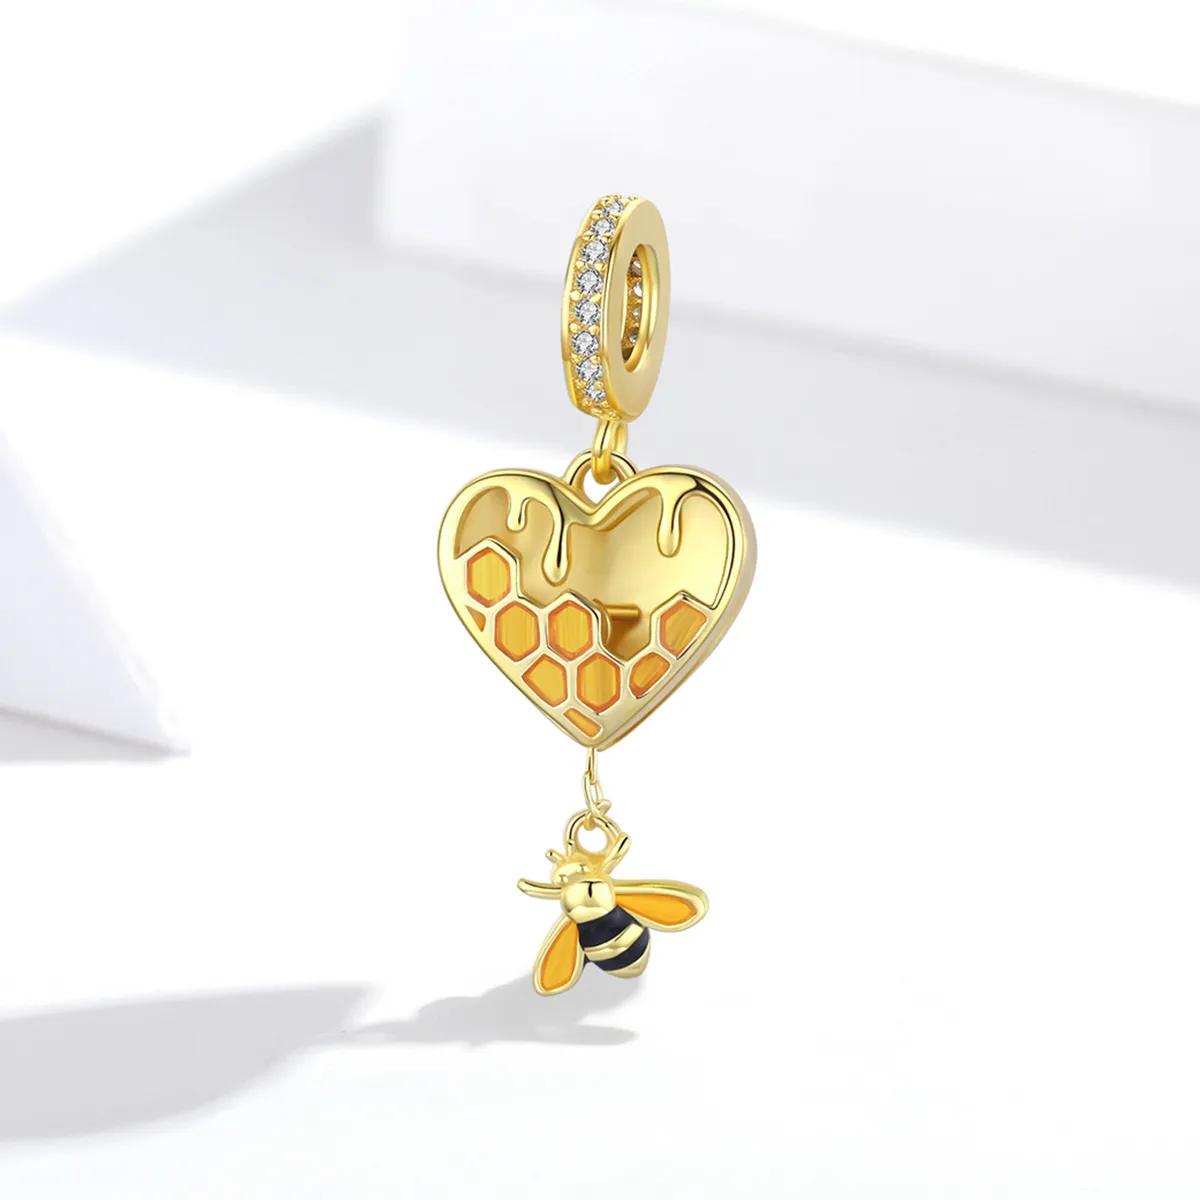 Pandora Style 18ct Gold Plated Love Honeycomb Dangle - SCC1714